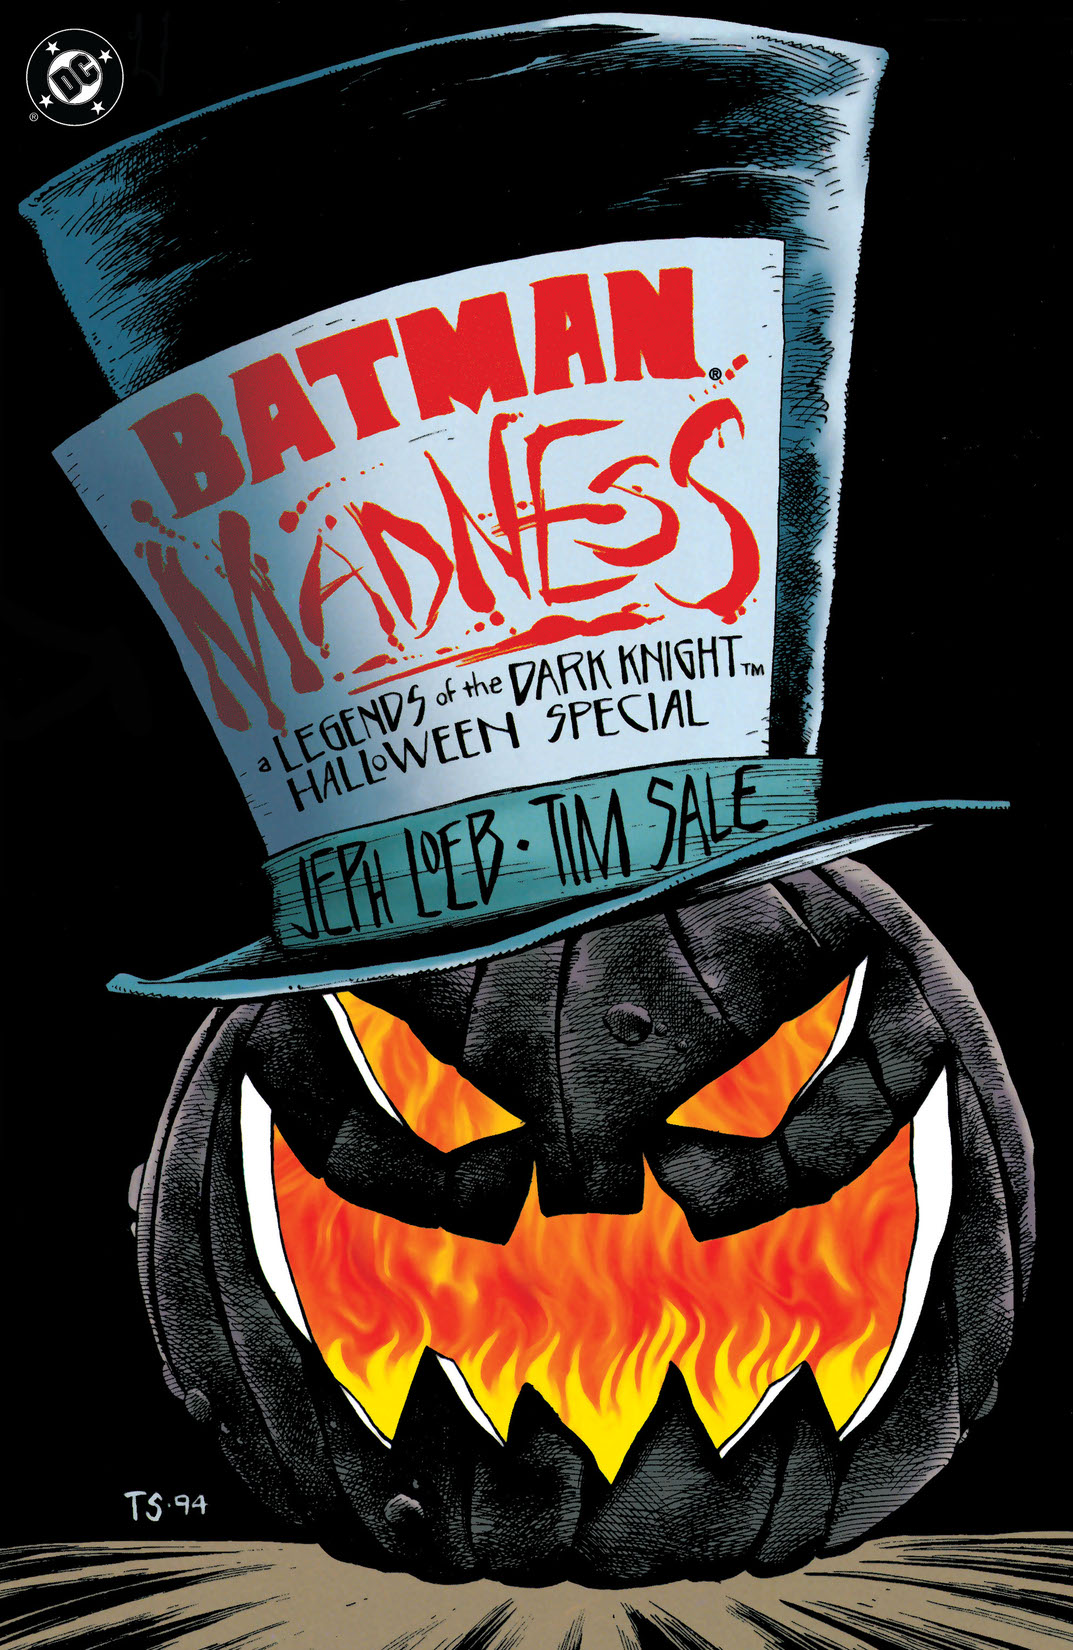 Batman: Madness - A Legends of the Dark Knight Halloween Special #1 preview images